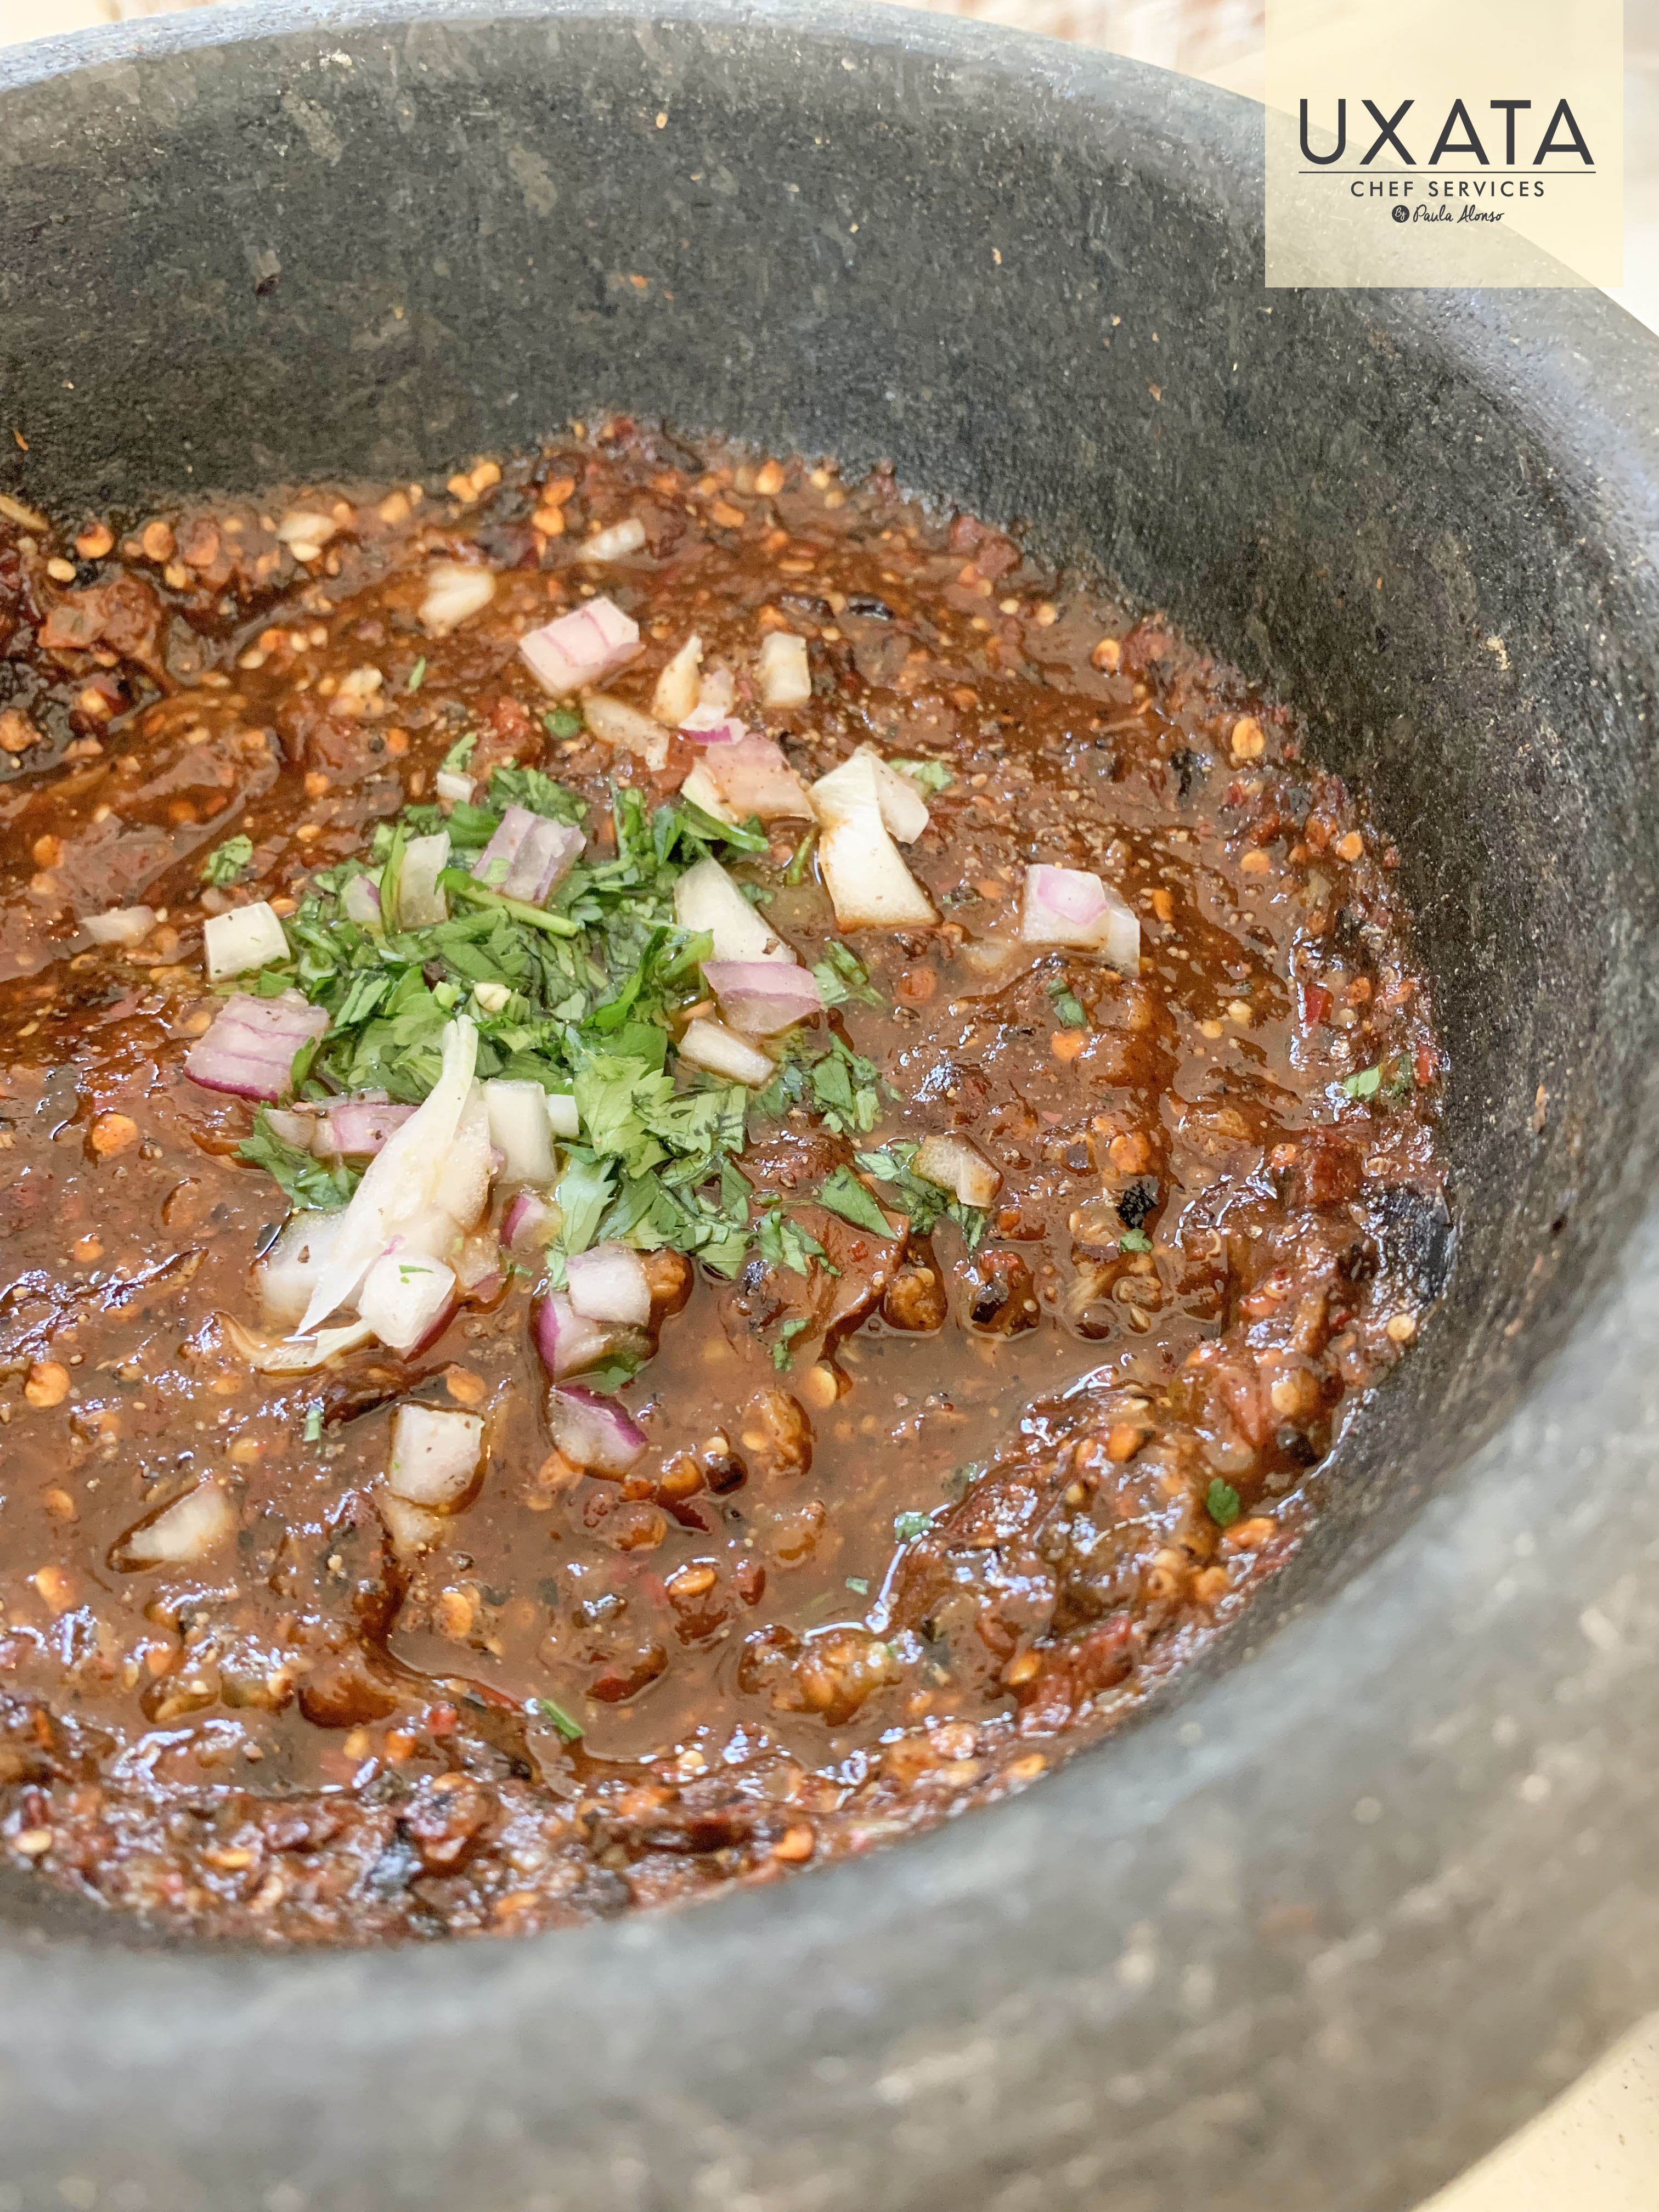 Guajillo, peanuts and seeds sauce in a molcajete, by UXATA Private Chef Services, Riviera Maya.